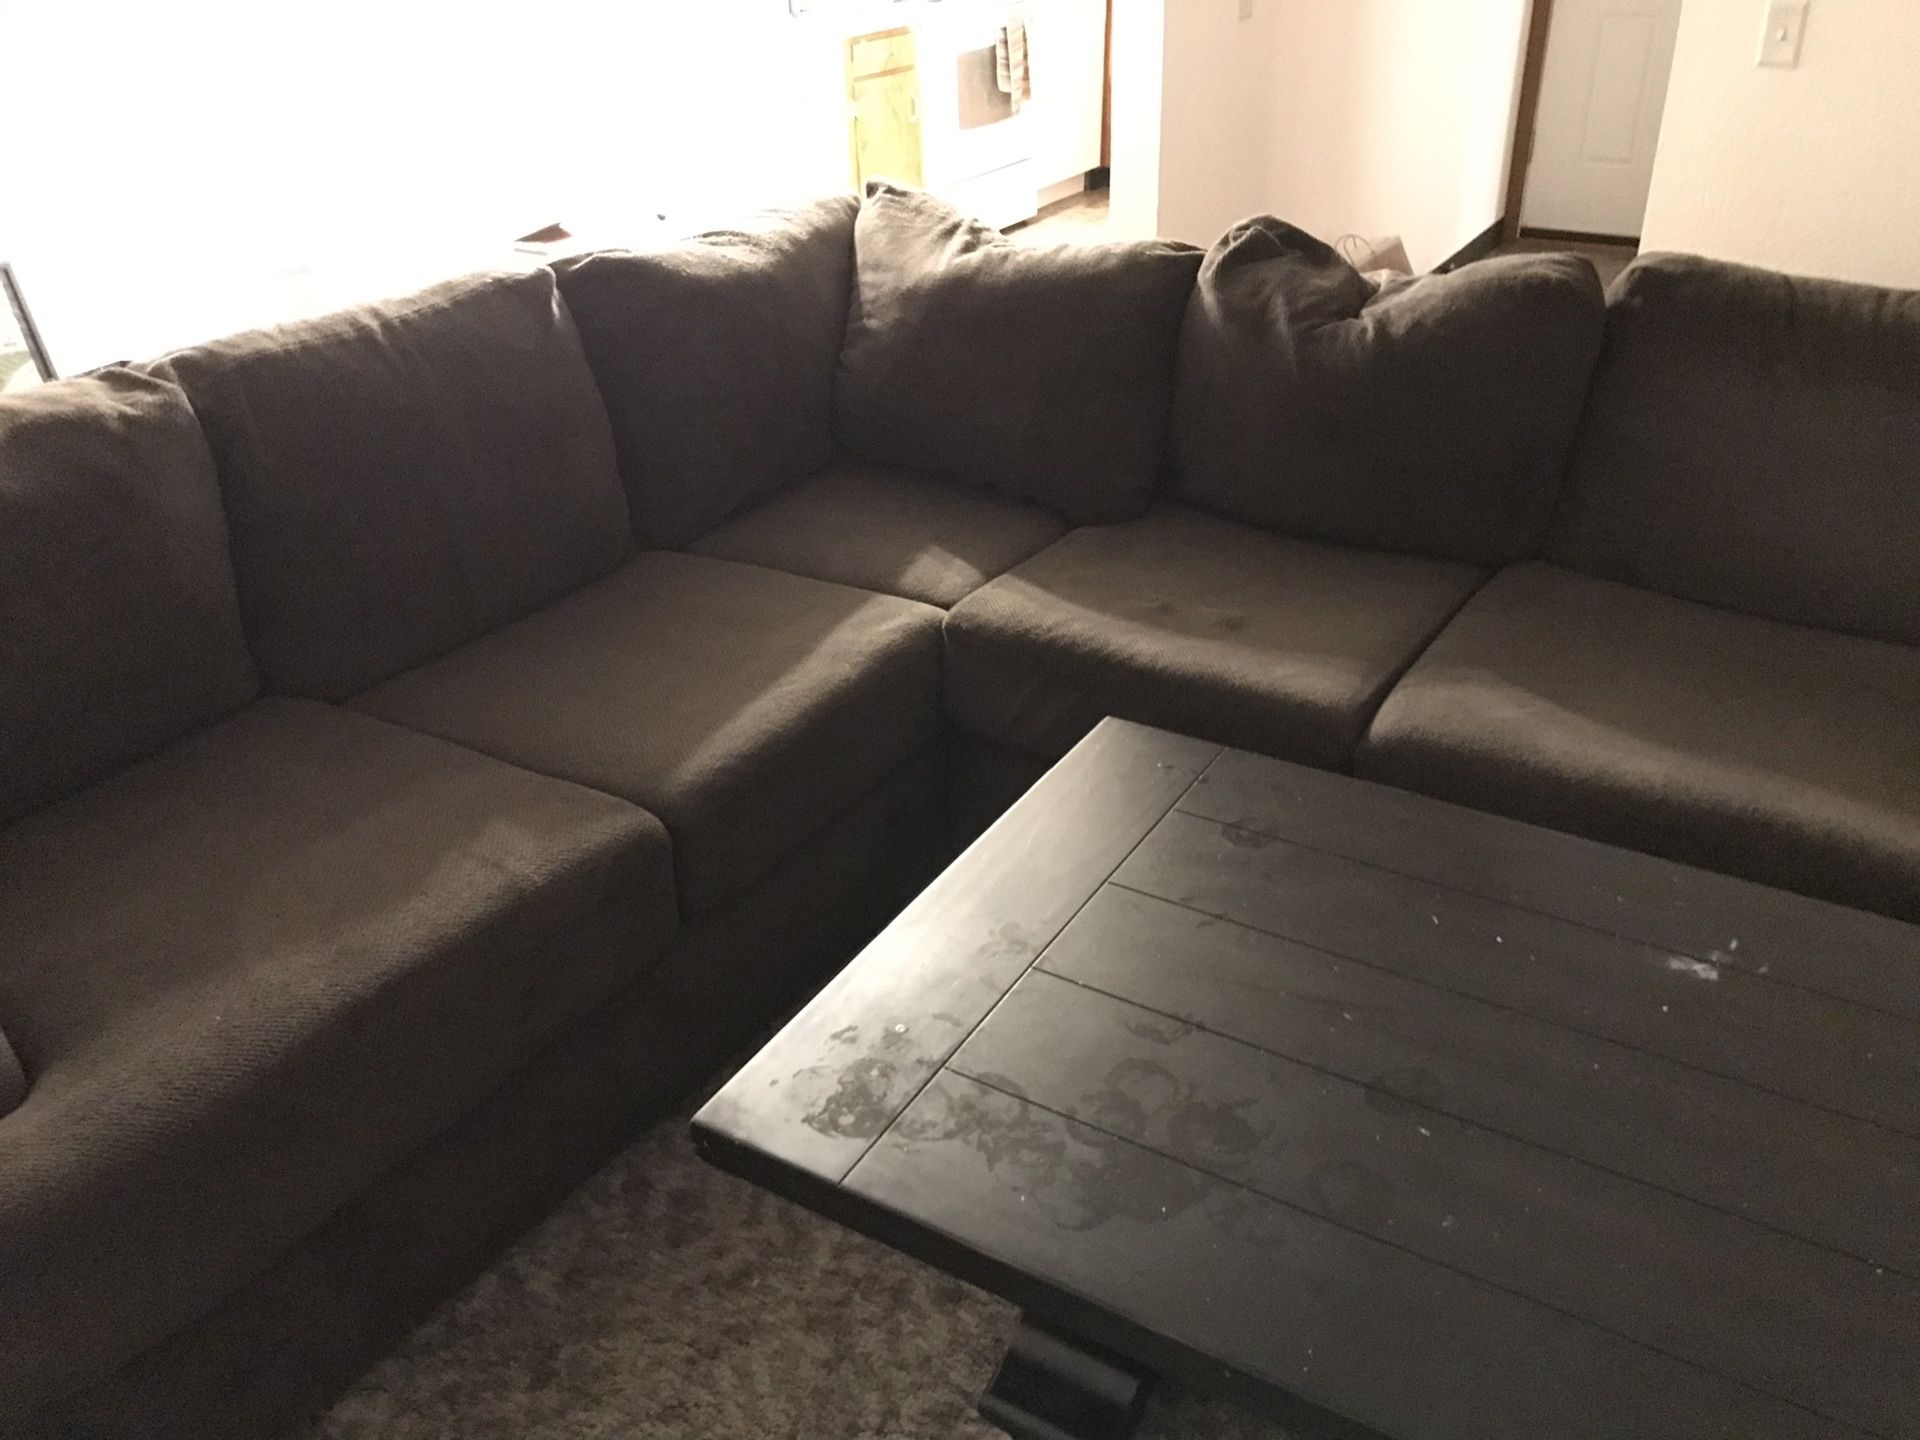 Huge sectional and coffee table. Used